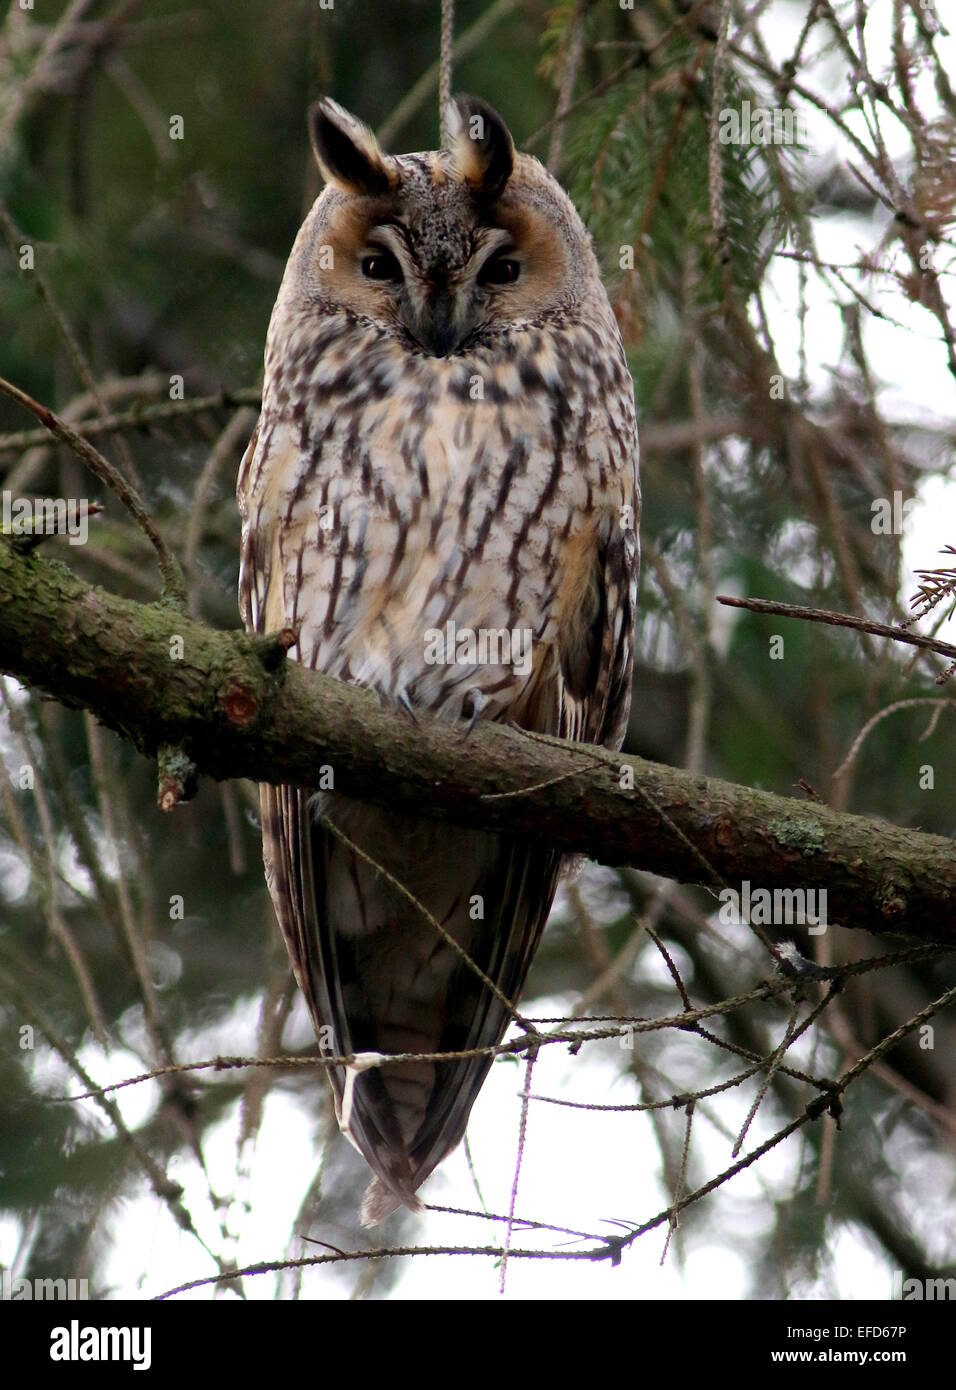 Long-eared Owl (Asio otus) in a pine tree during daytime, facing camera Stock Photo